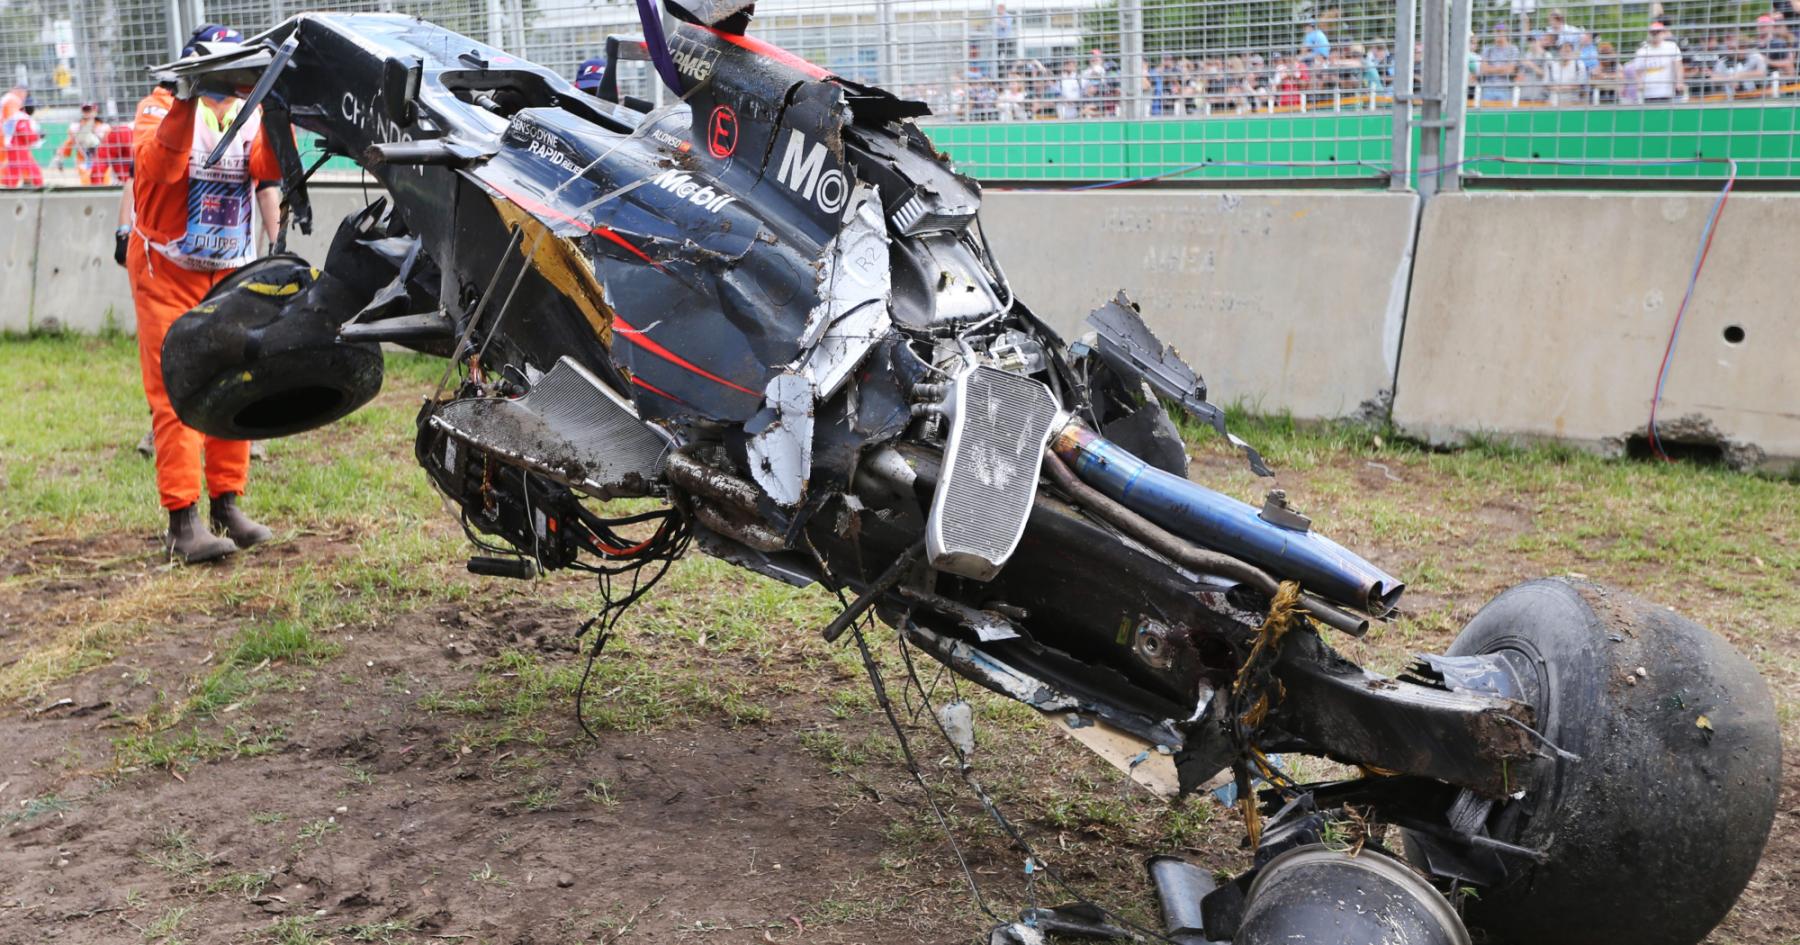 Alonso's Miraculous Survival: The Unbelievable Crash That Defied the Odds